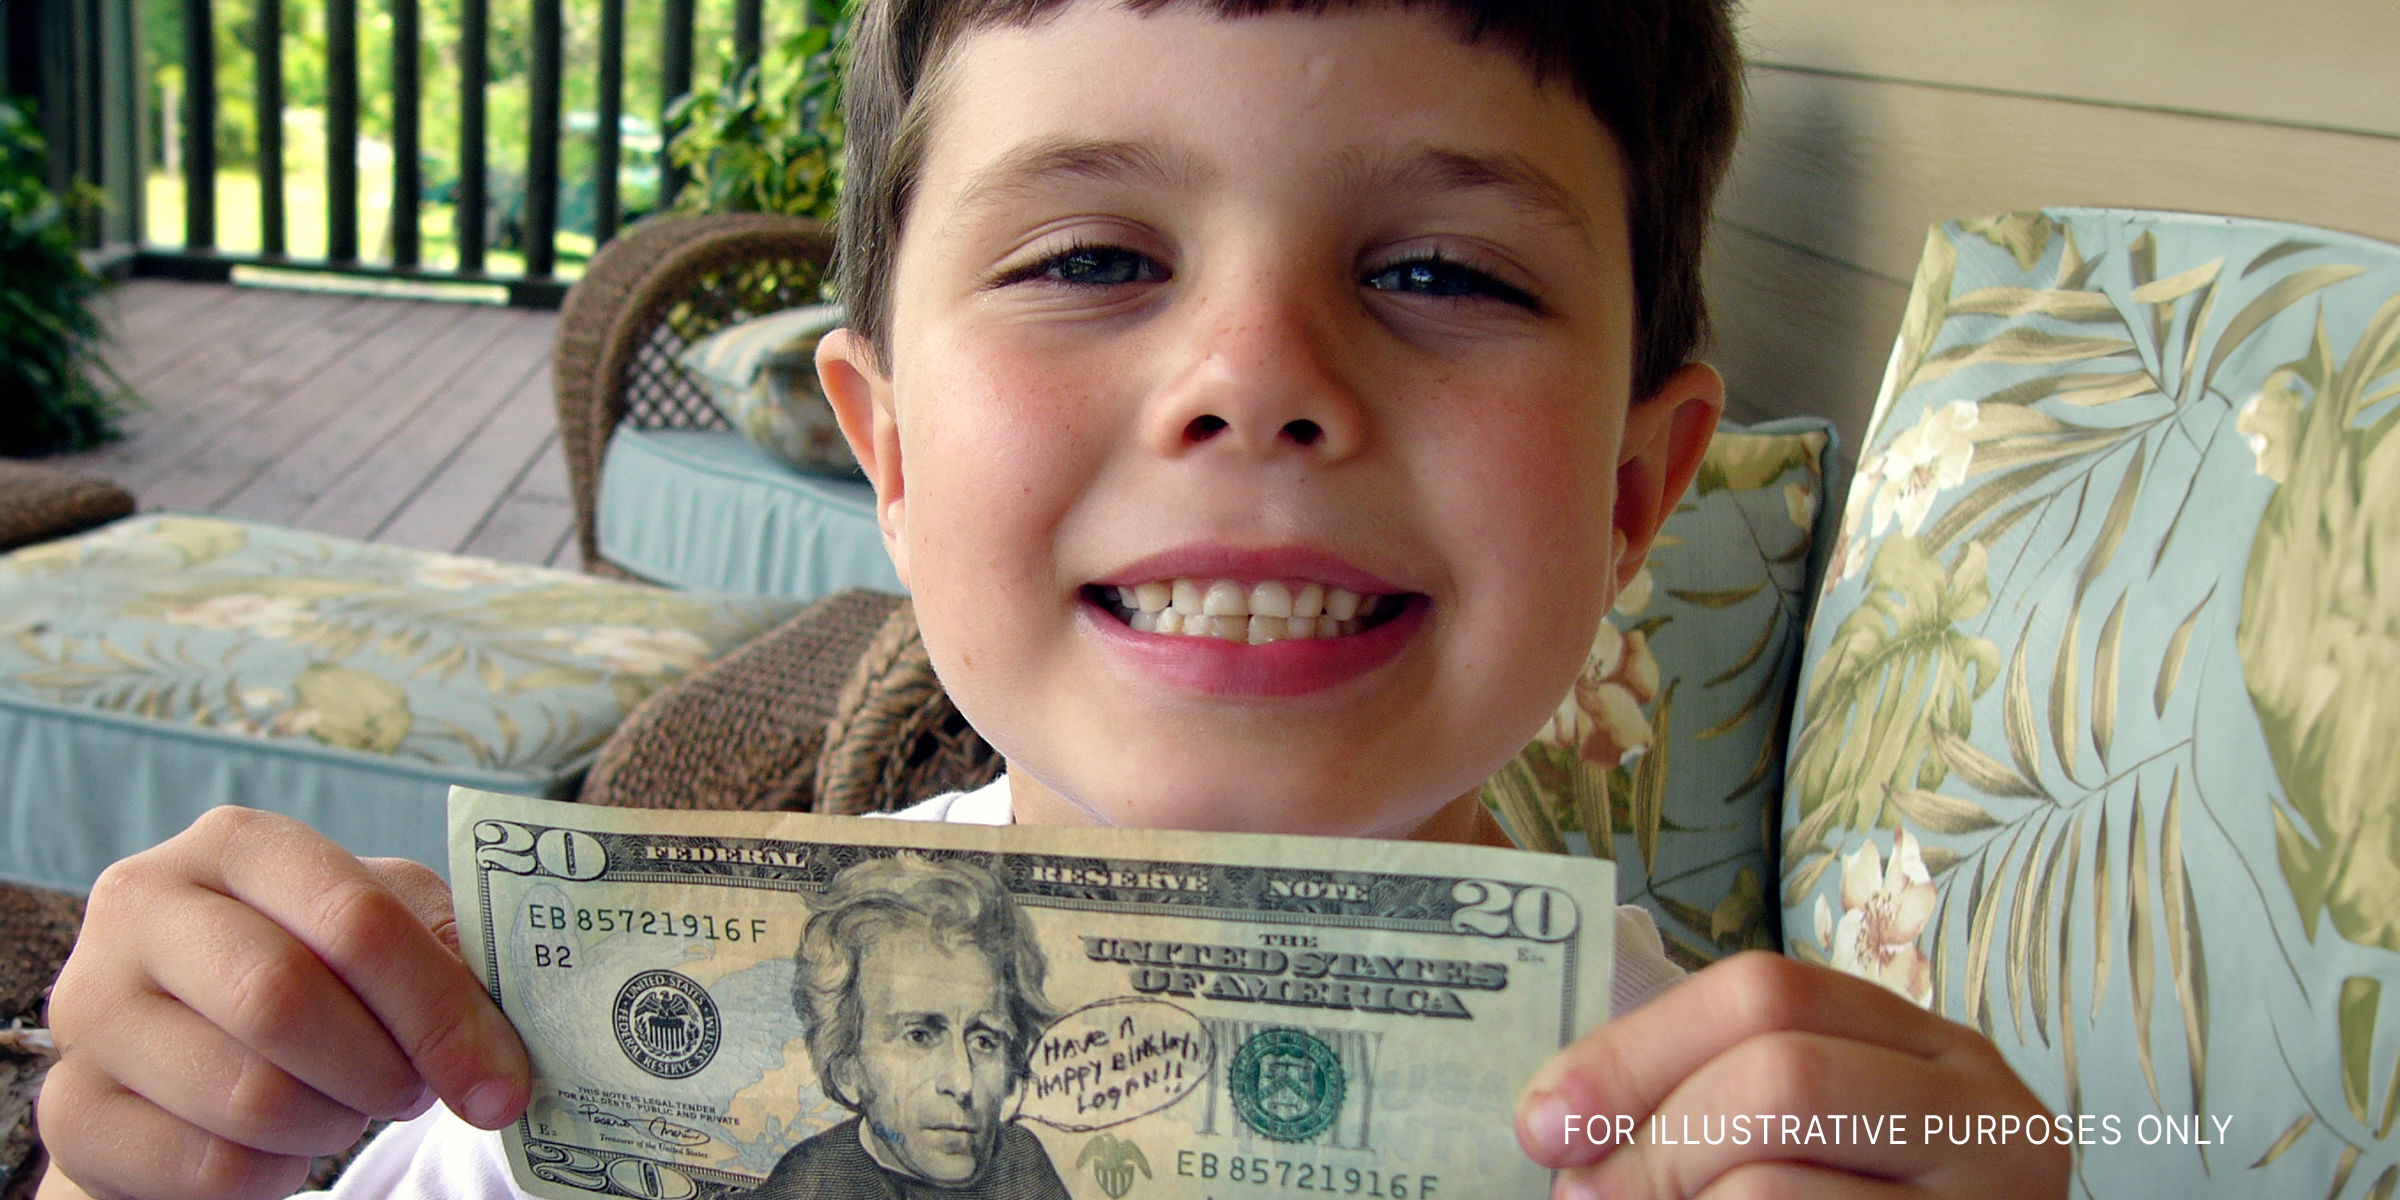 A little child holding money | Source: flickr.com/Kathleen Tyler Conklin/CC BY 2.0